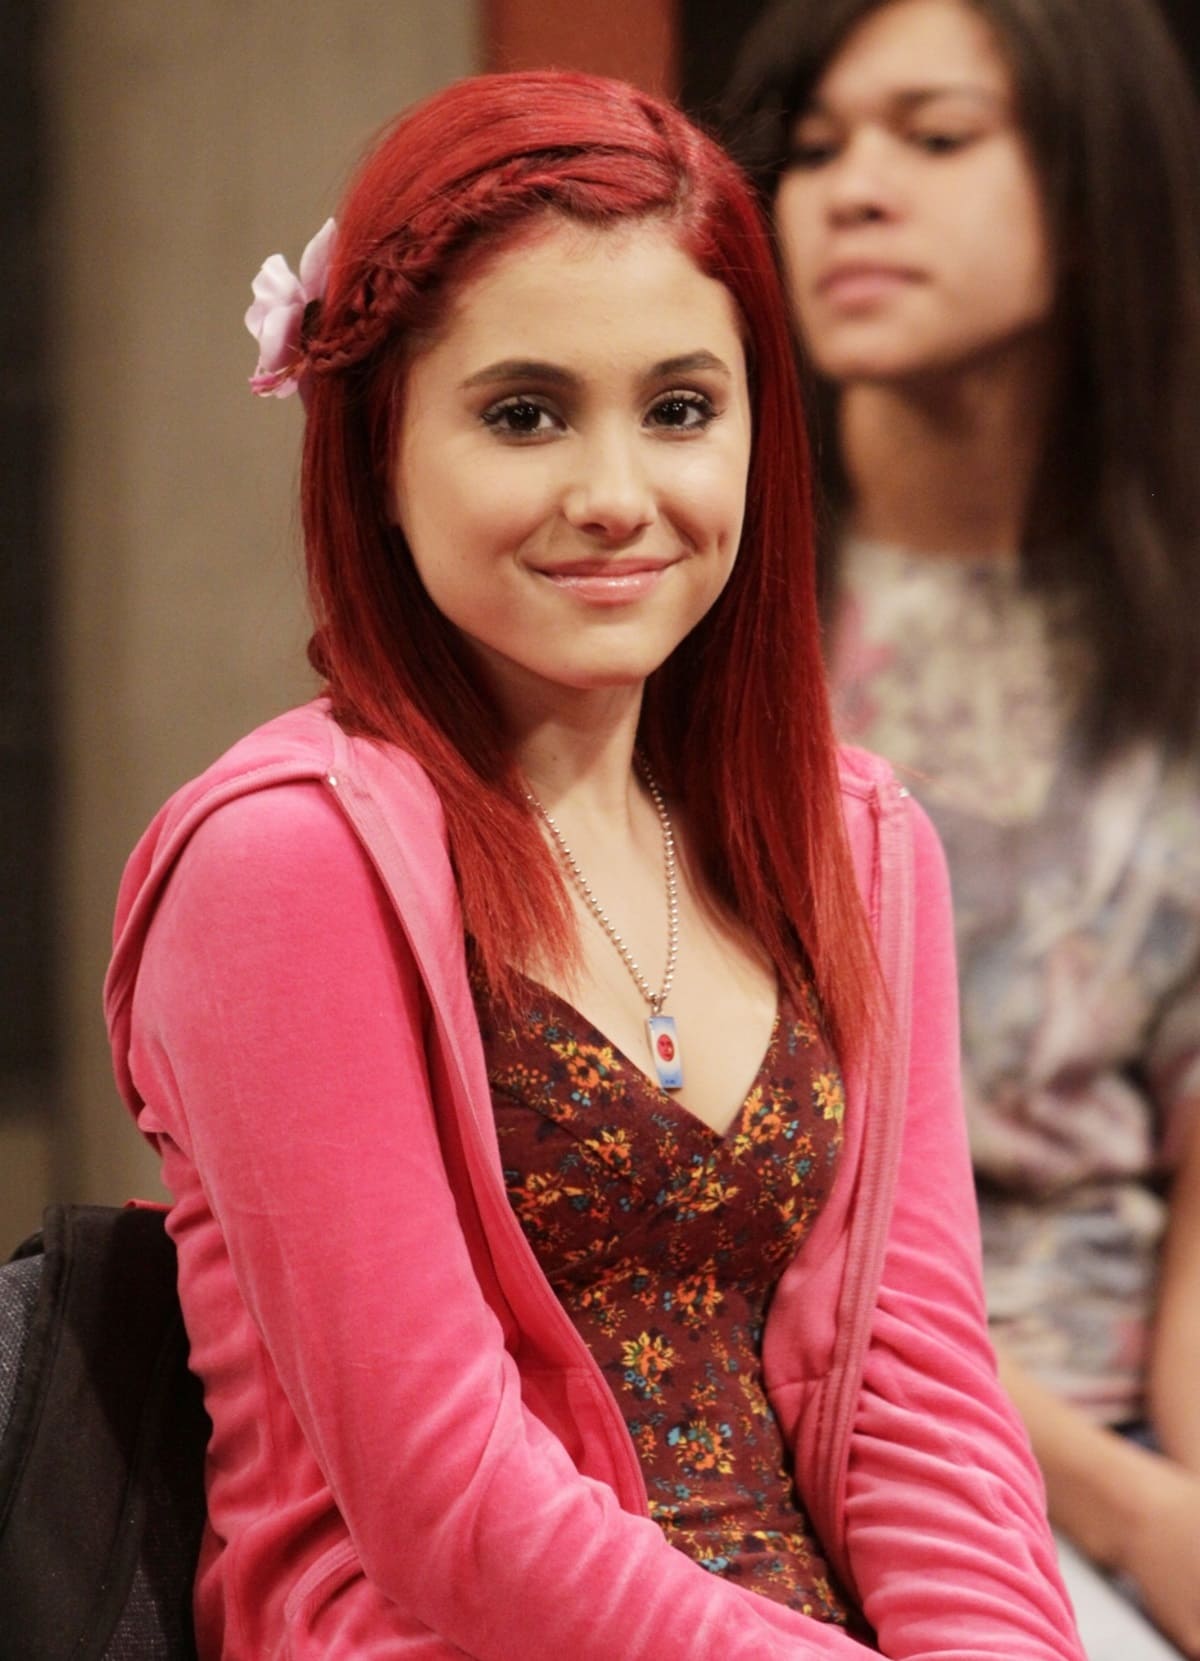 Ariana Grande's red hair was a signature part of her look as Cat Valentine on the Nickelodeon shows Victorious and Sam & Cat